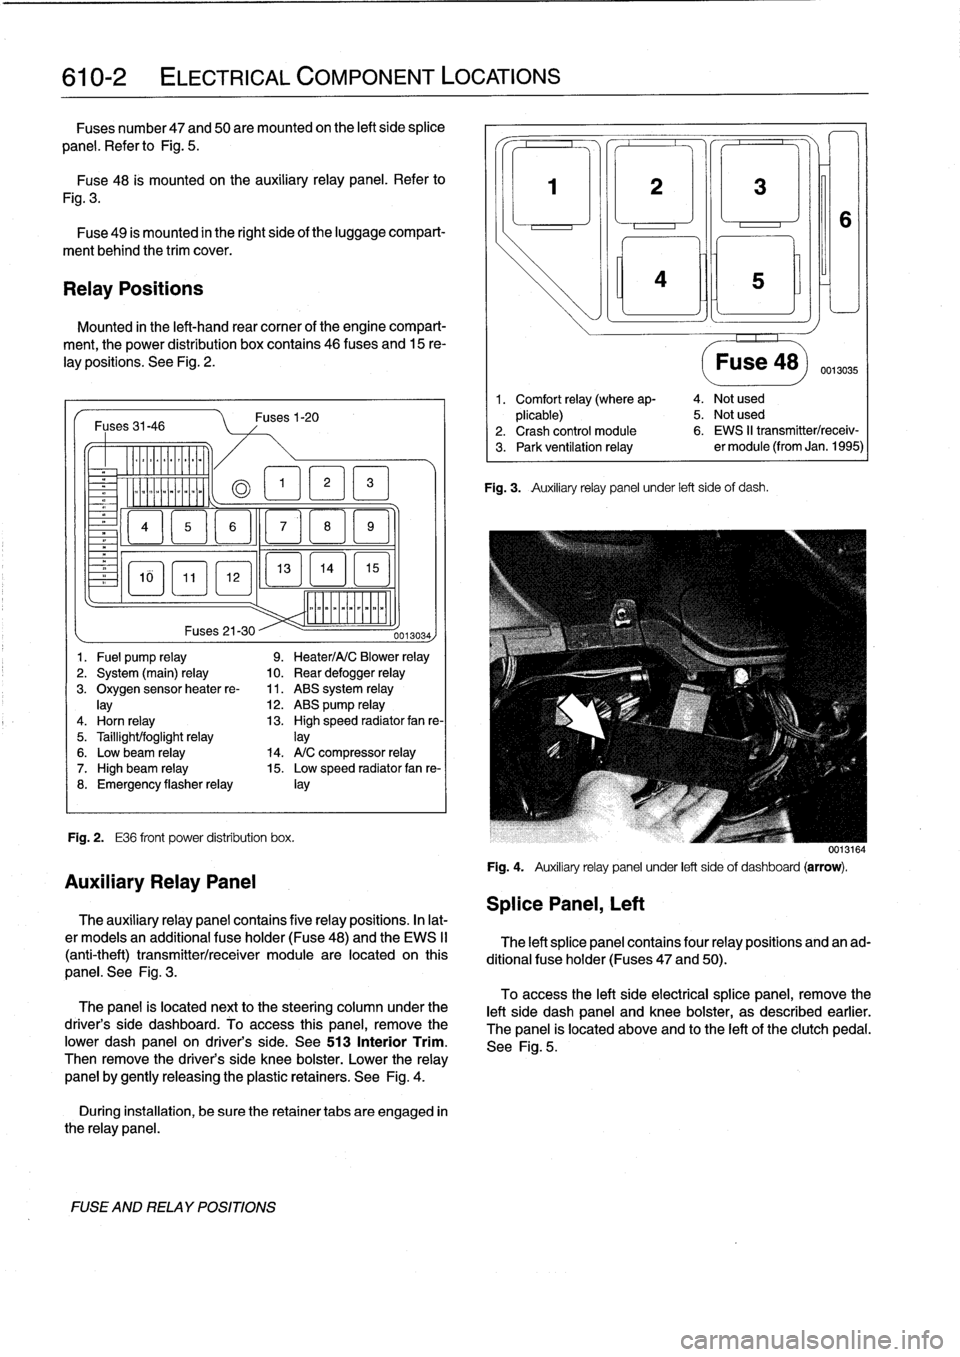 BMW 323i 1993 E36 Workshop Manual 
610-2

	

ELECTRICAL
COMPONENT
LOCATIONS

Fuses
number47
and
50are
mounted
on
the
left
side
splice

panel
.
Refer
lo
Fig
.
5
.

Fuse48
is
mounted
on
the
auxiliary
relay
panel
.
Refer
to

Fig
.
3
.

F